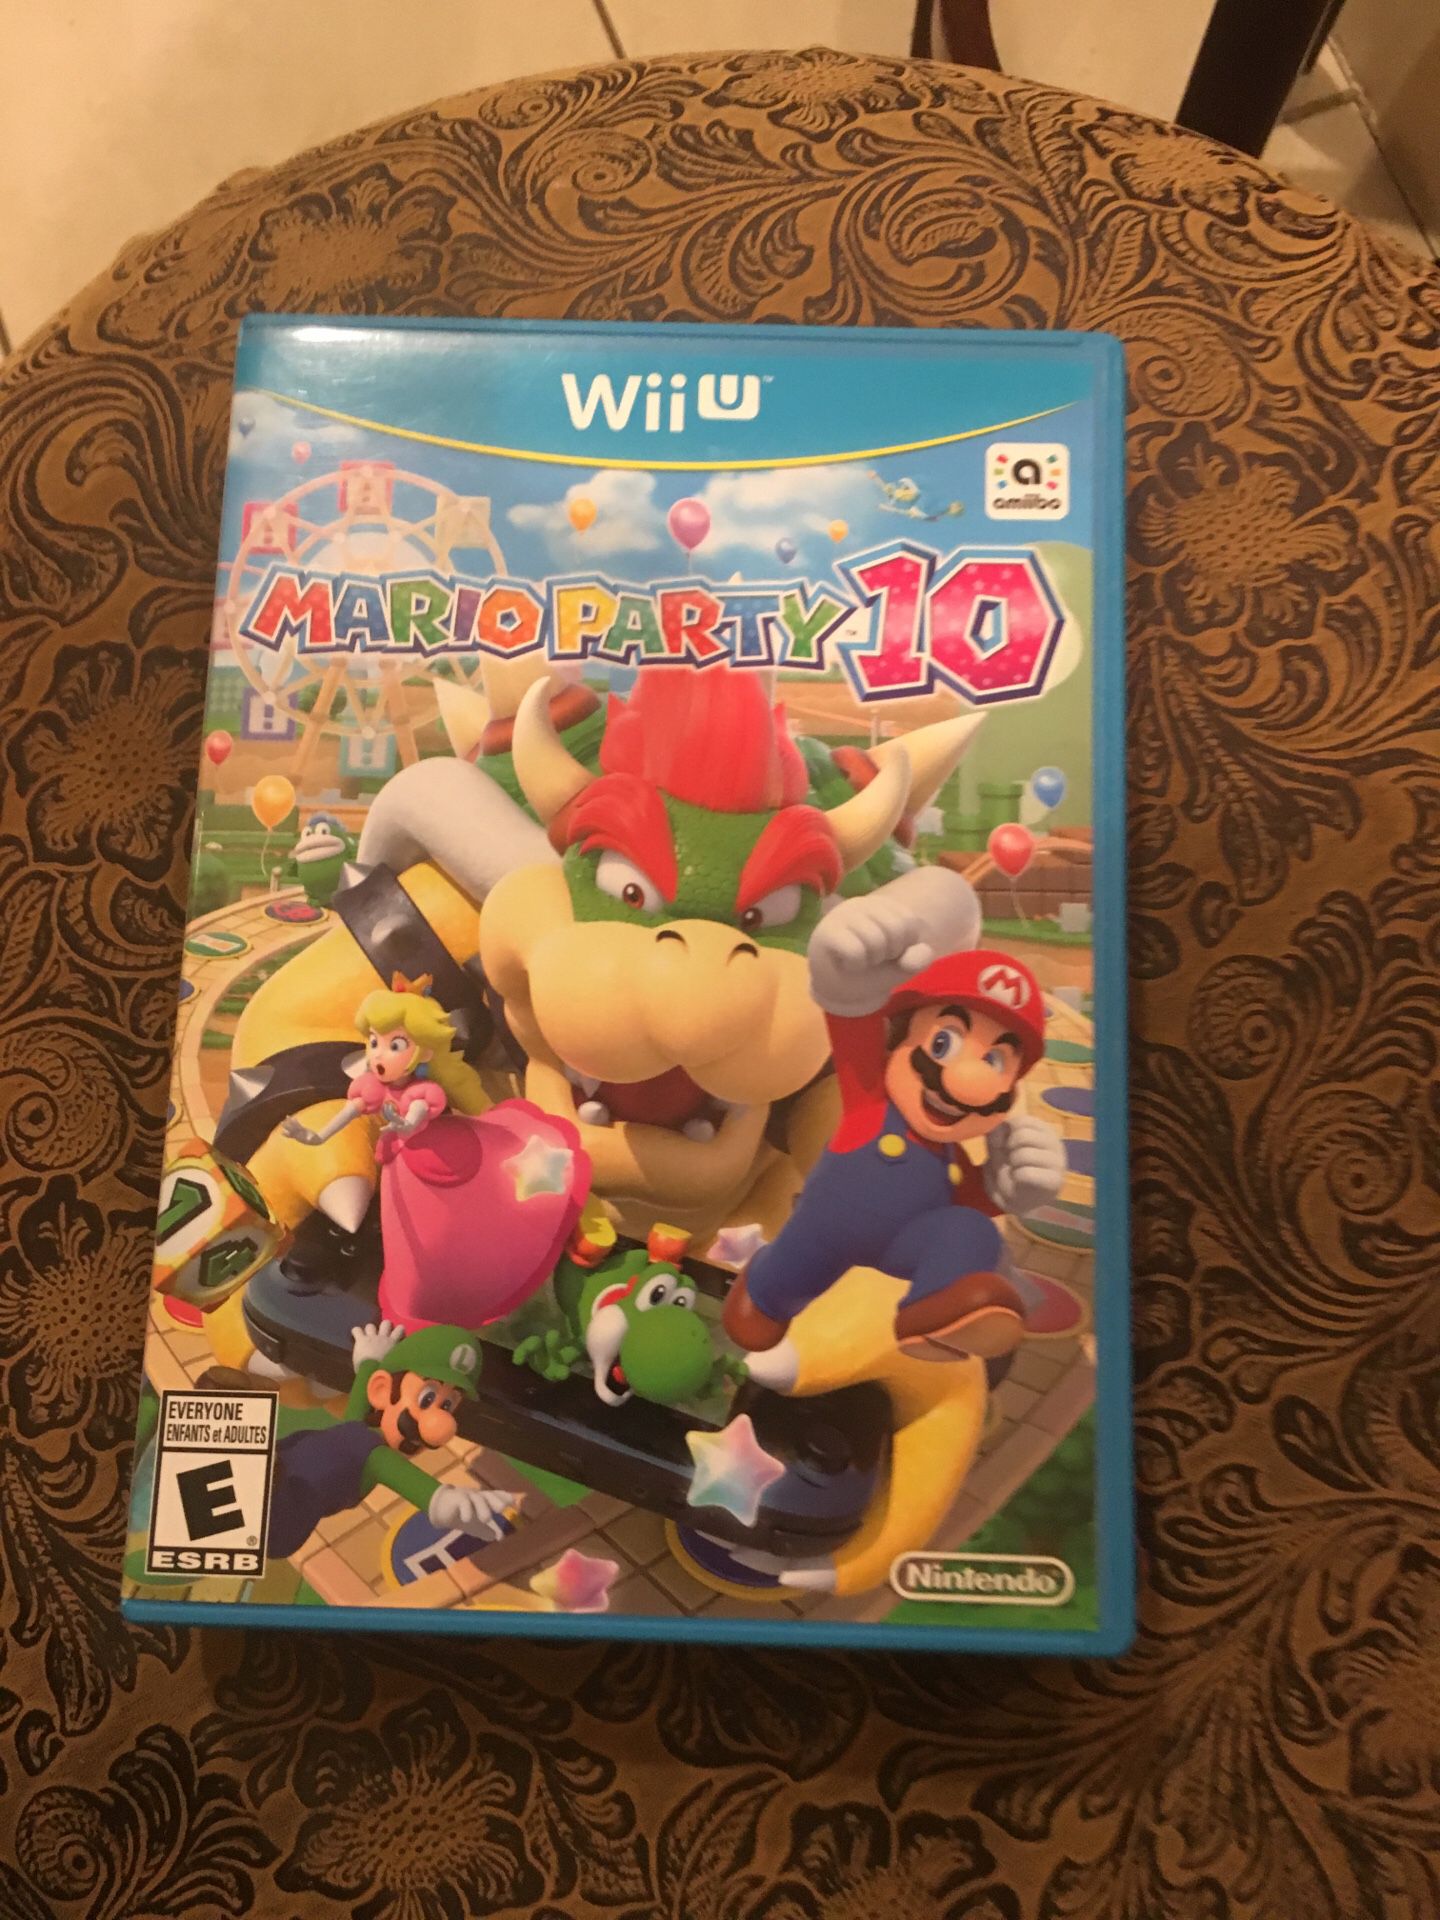 Mario party 10 for Wii U